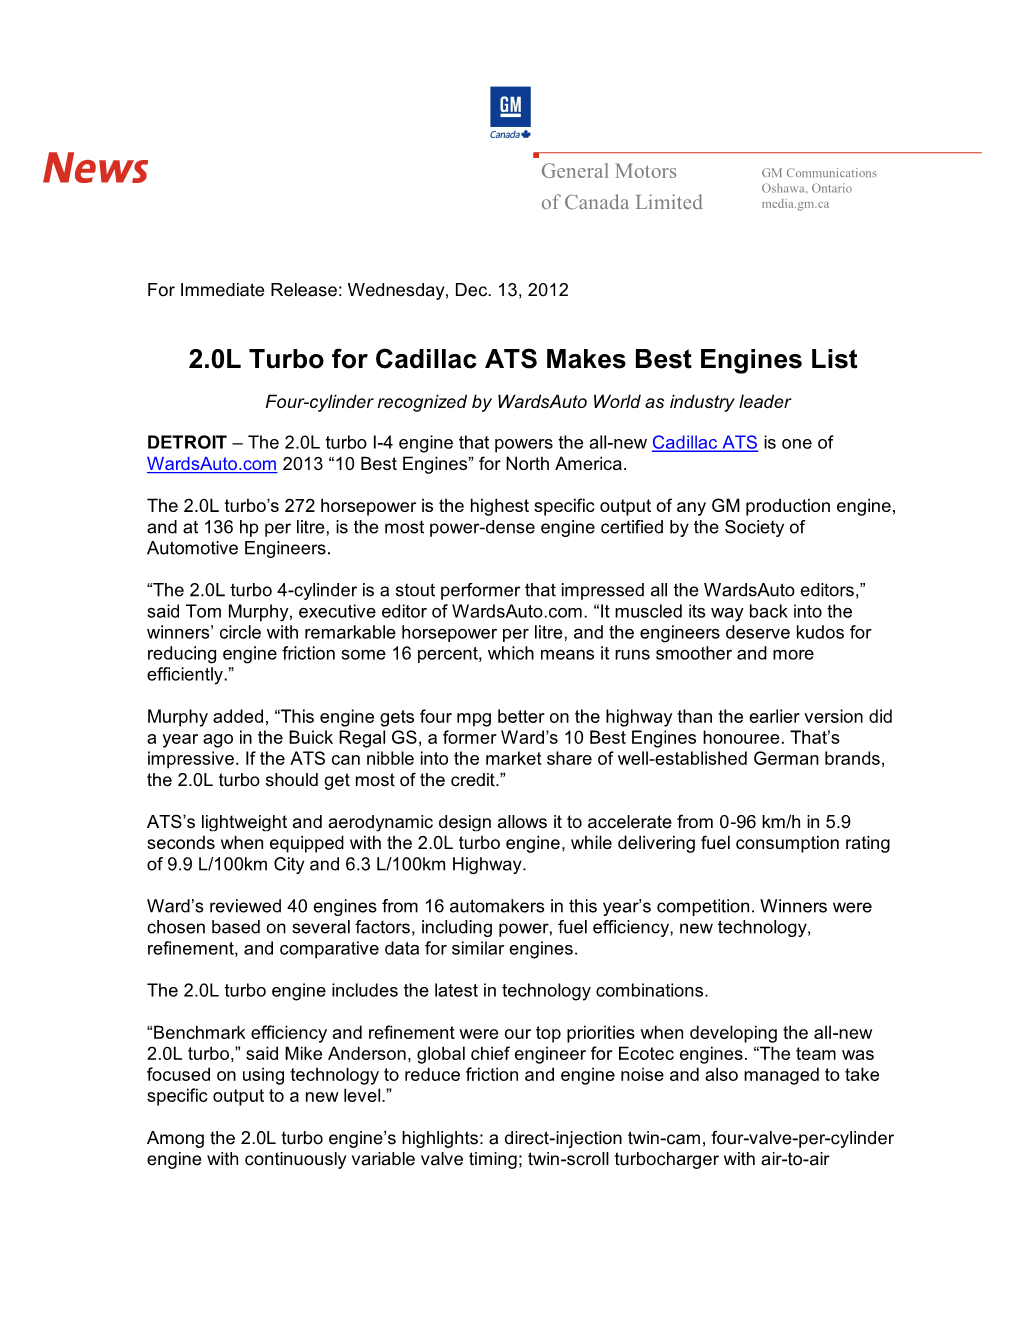 2.0L Turbo for Cadillac ATS Makes Best Engines List